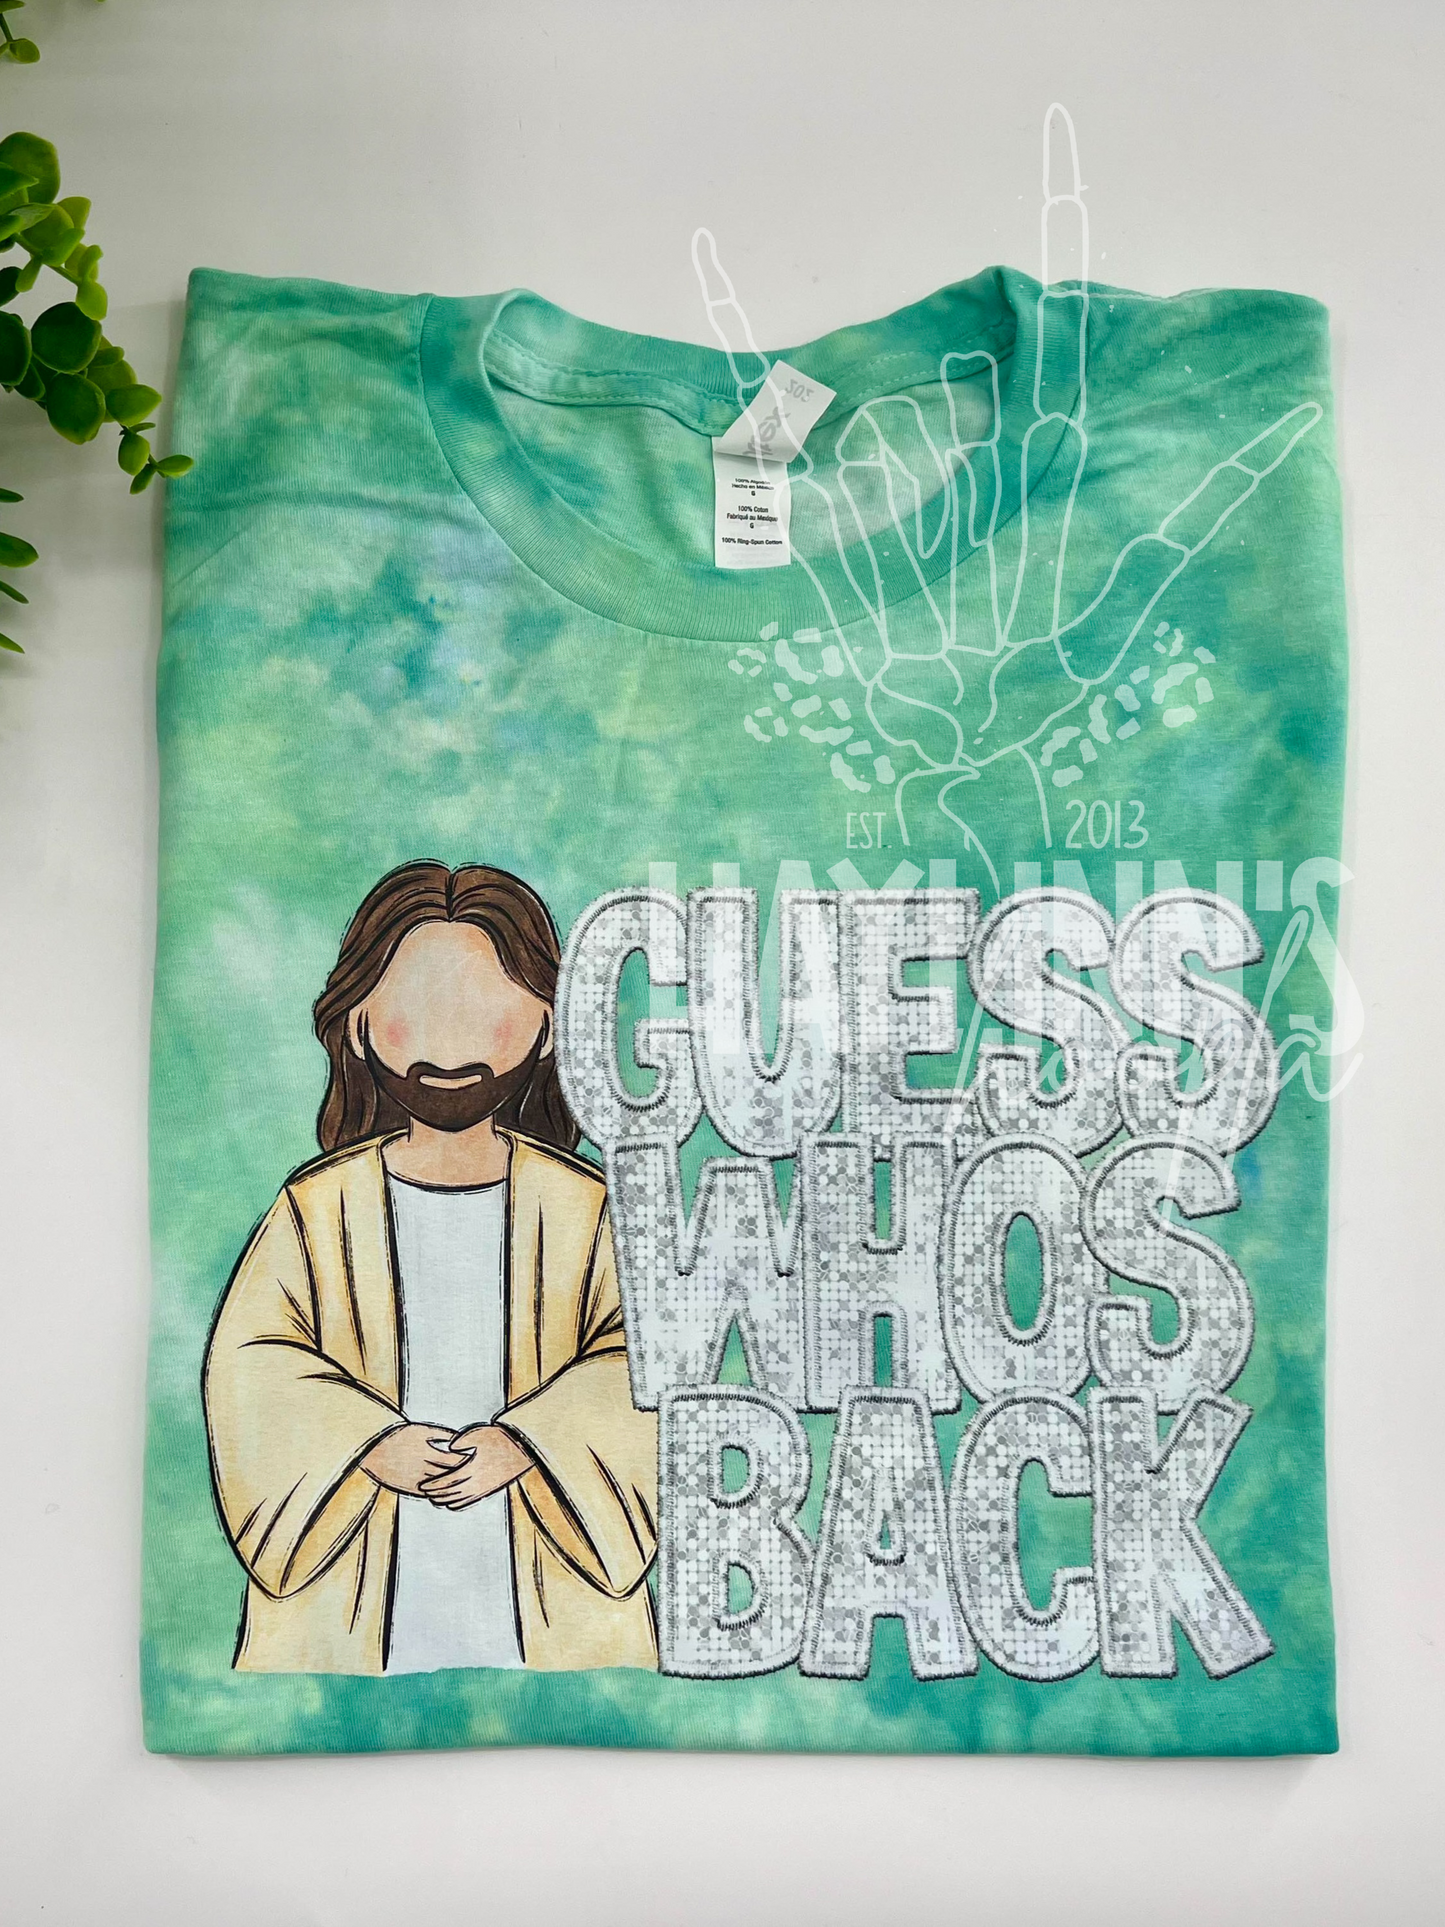 Guess Who's Back Tee